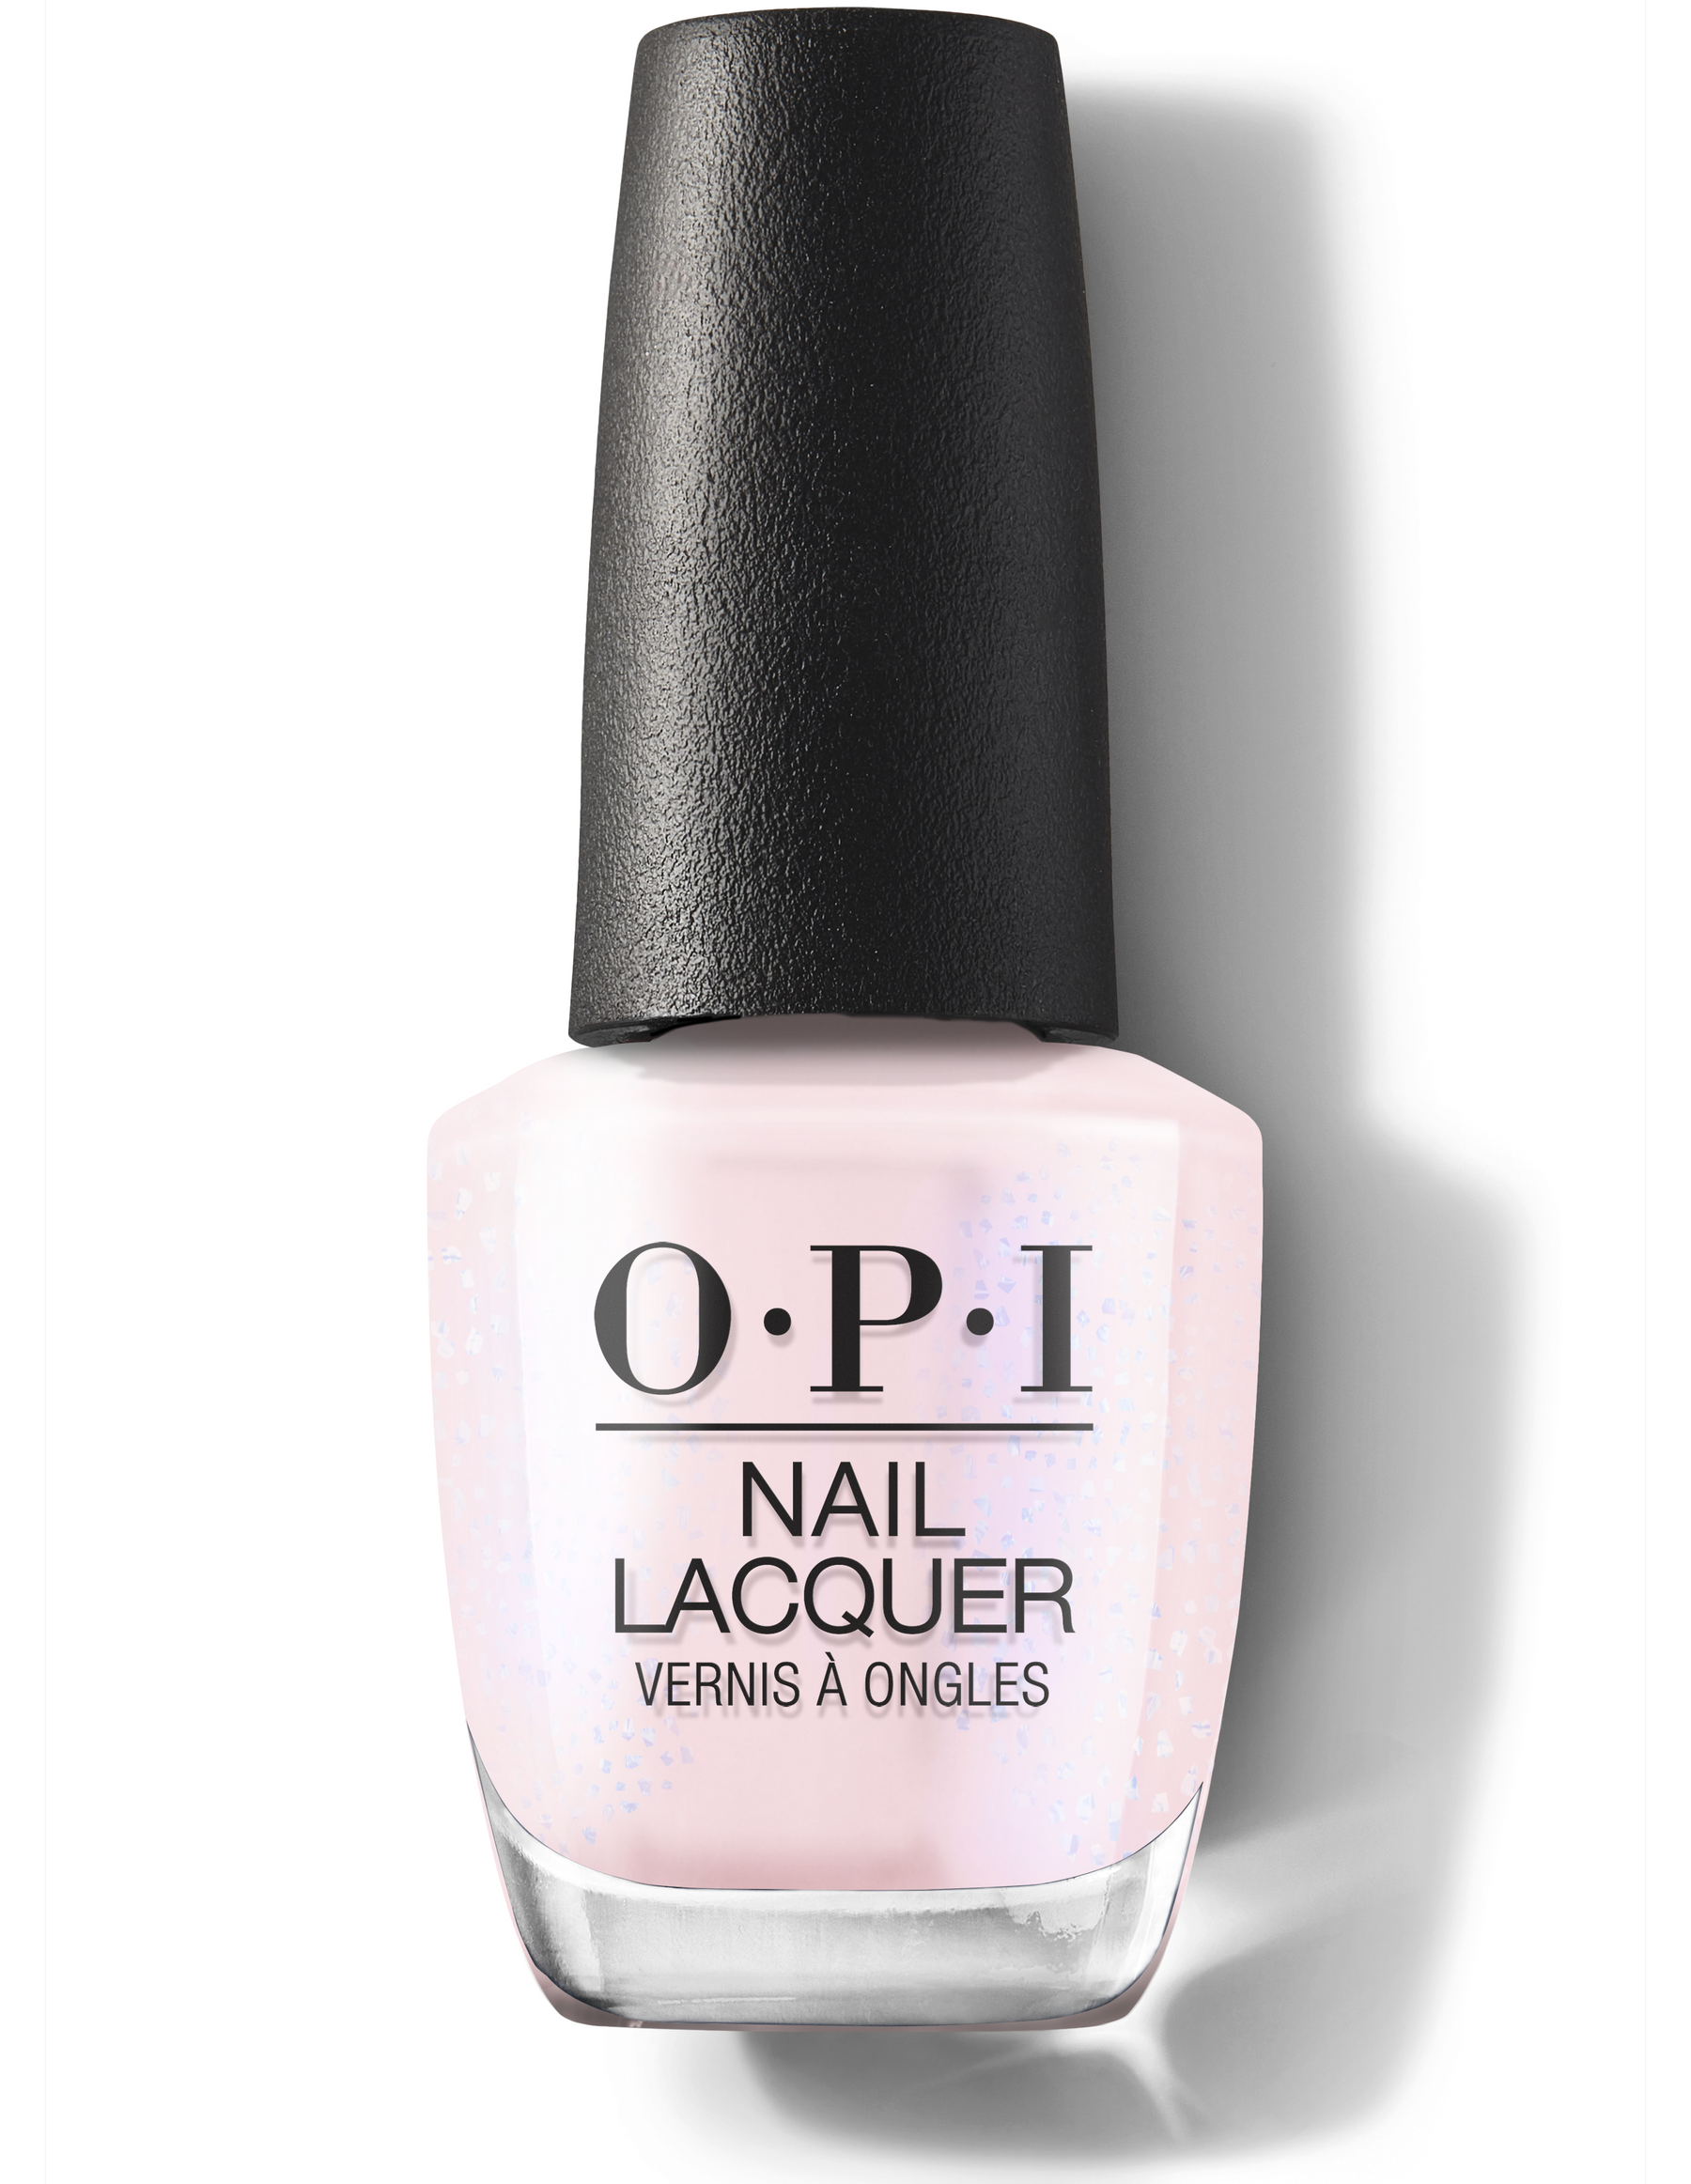 OPI Nail Lacquer - All Glitters - OPI Nail Lacquer From Dusk til Dune - NLN76 - ProCare Outlet by OPI